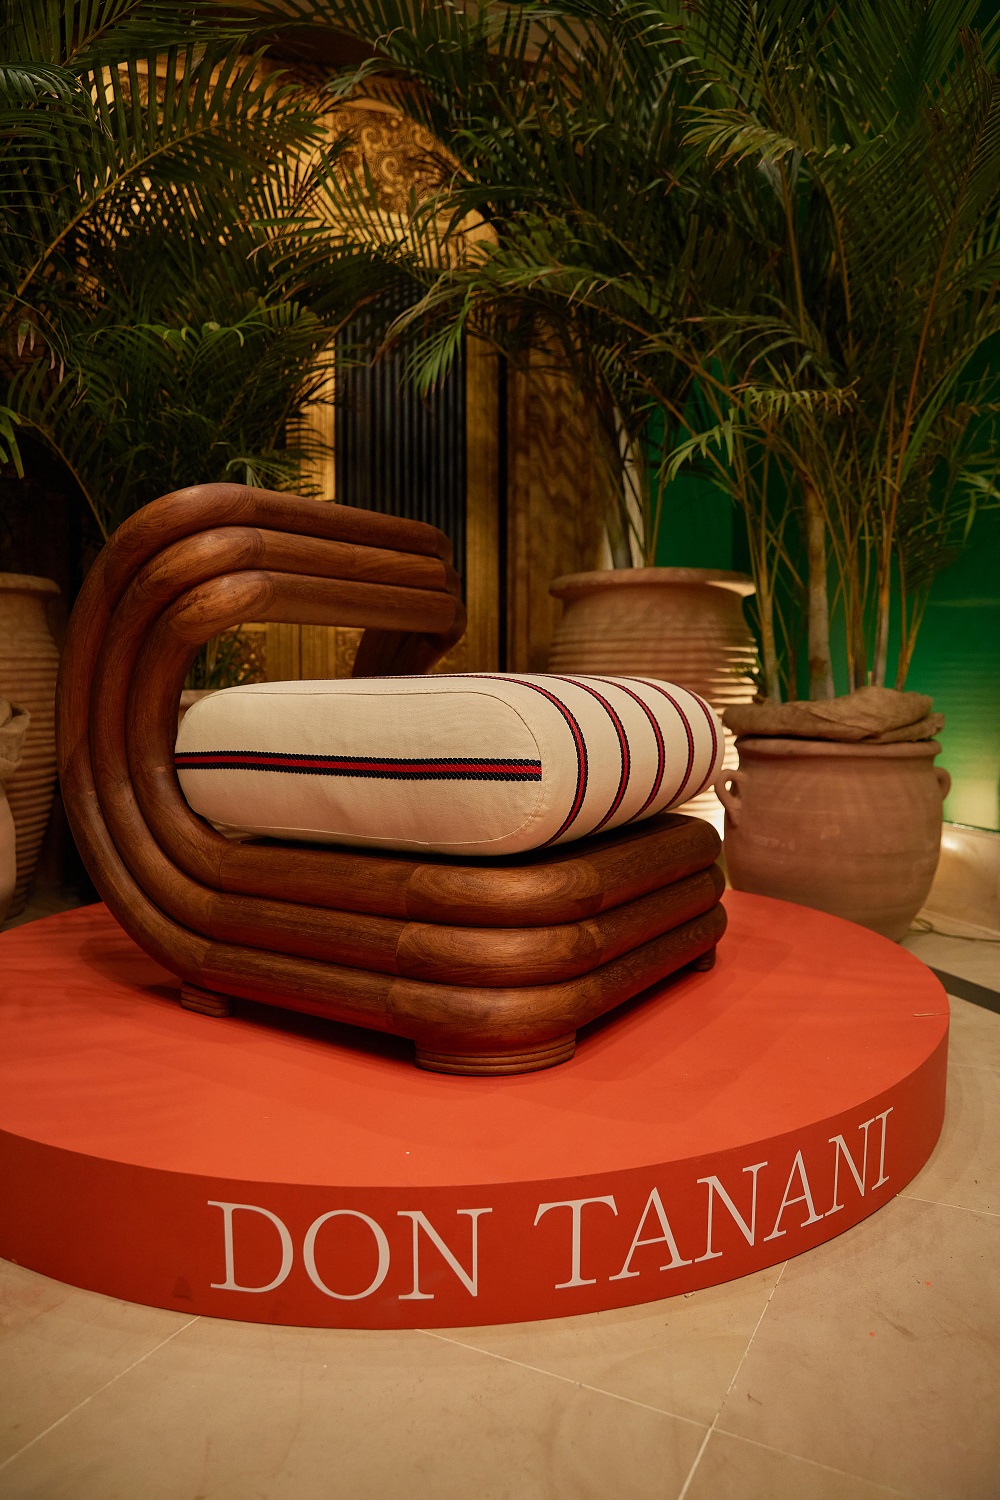 The Moruna collection by Don Tanani.